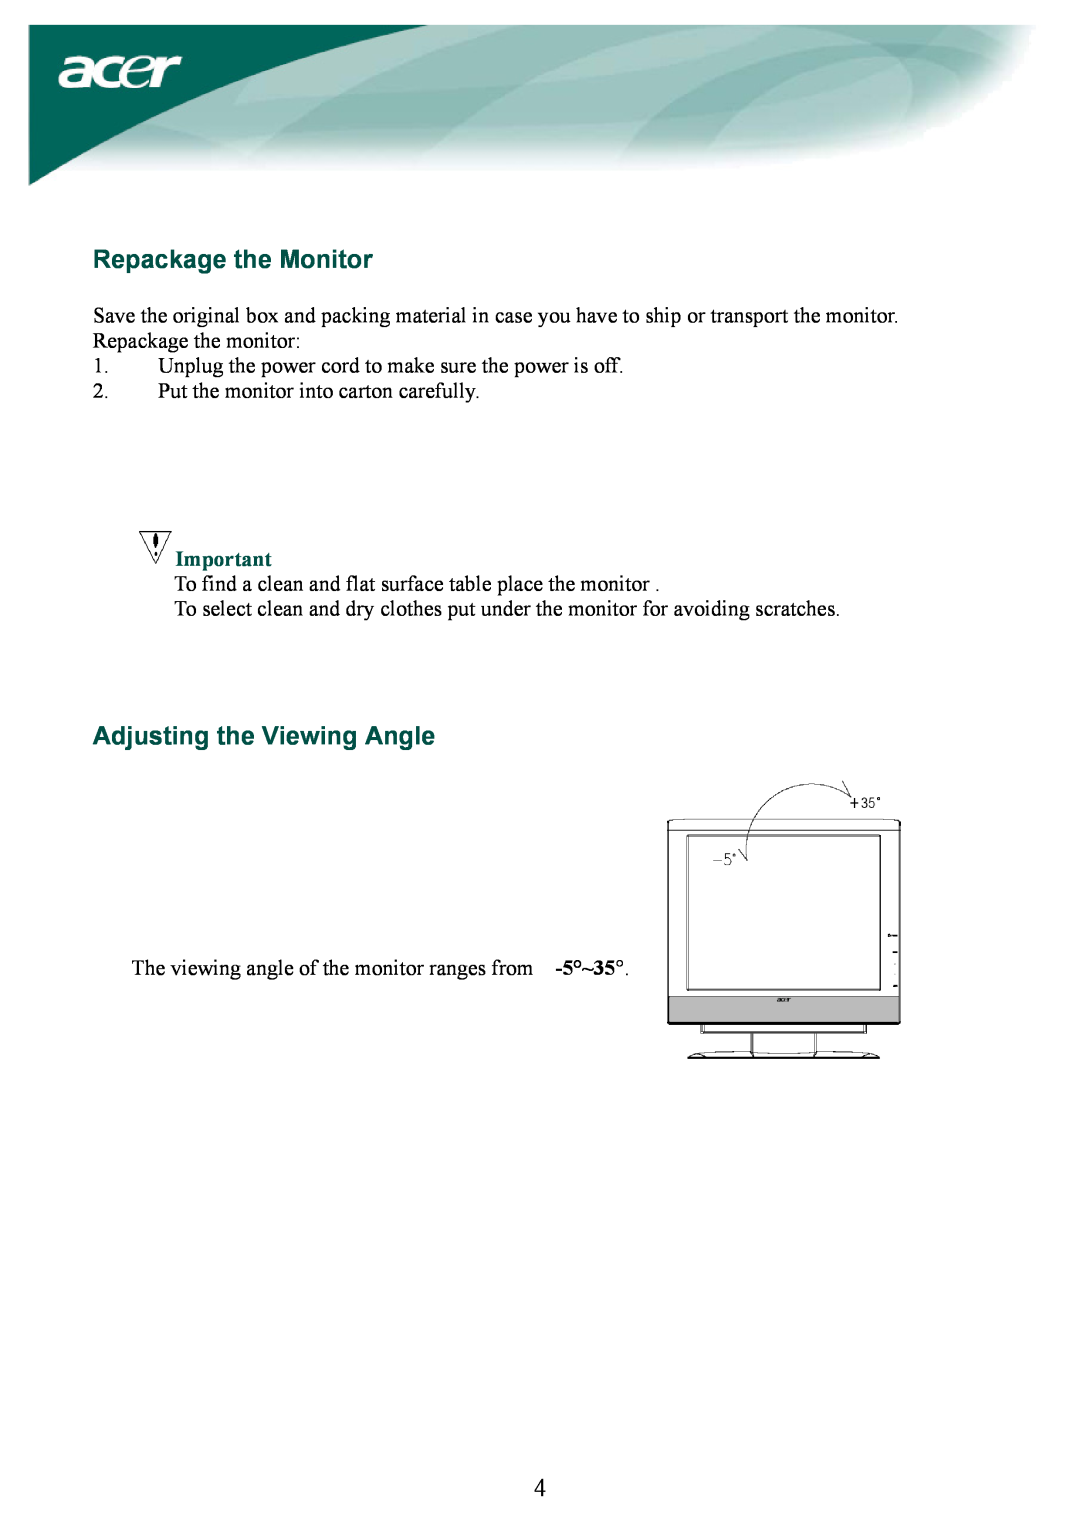 Acer AL1932 installation instructions Repackage the Monitor, Adjusting the Viewing Angle 